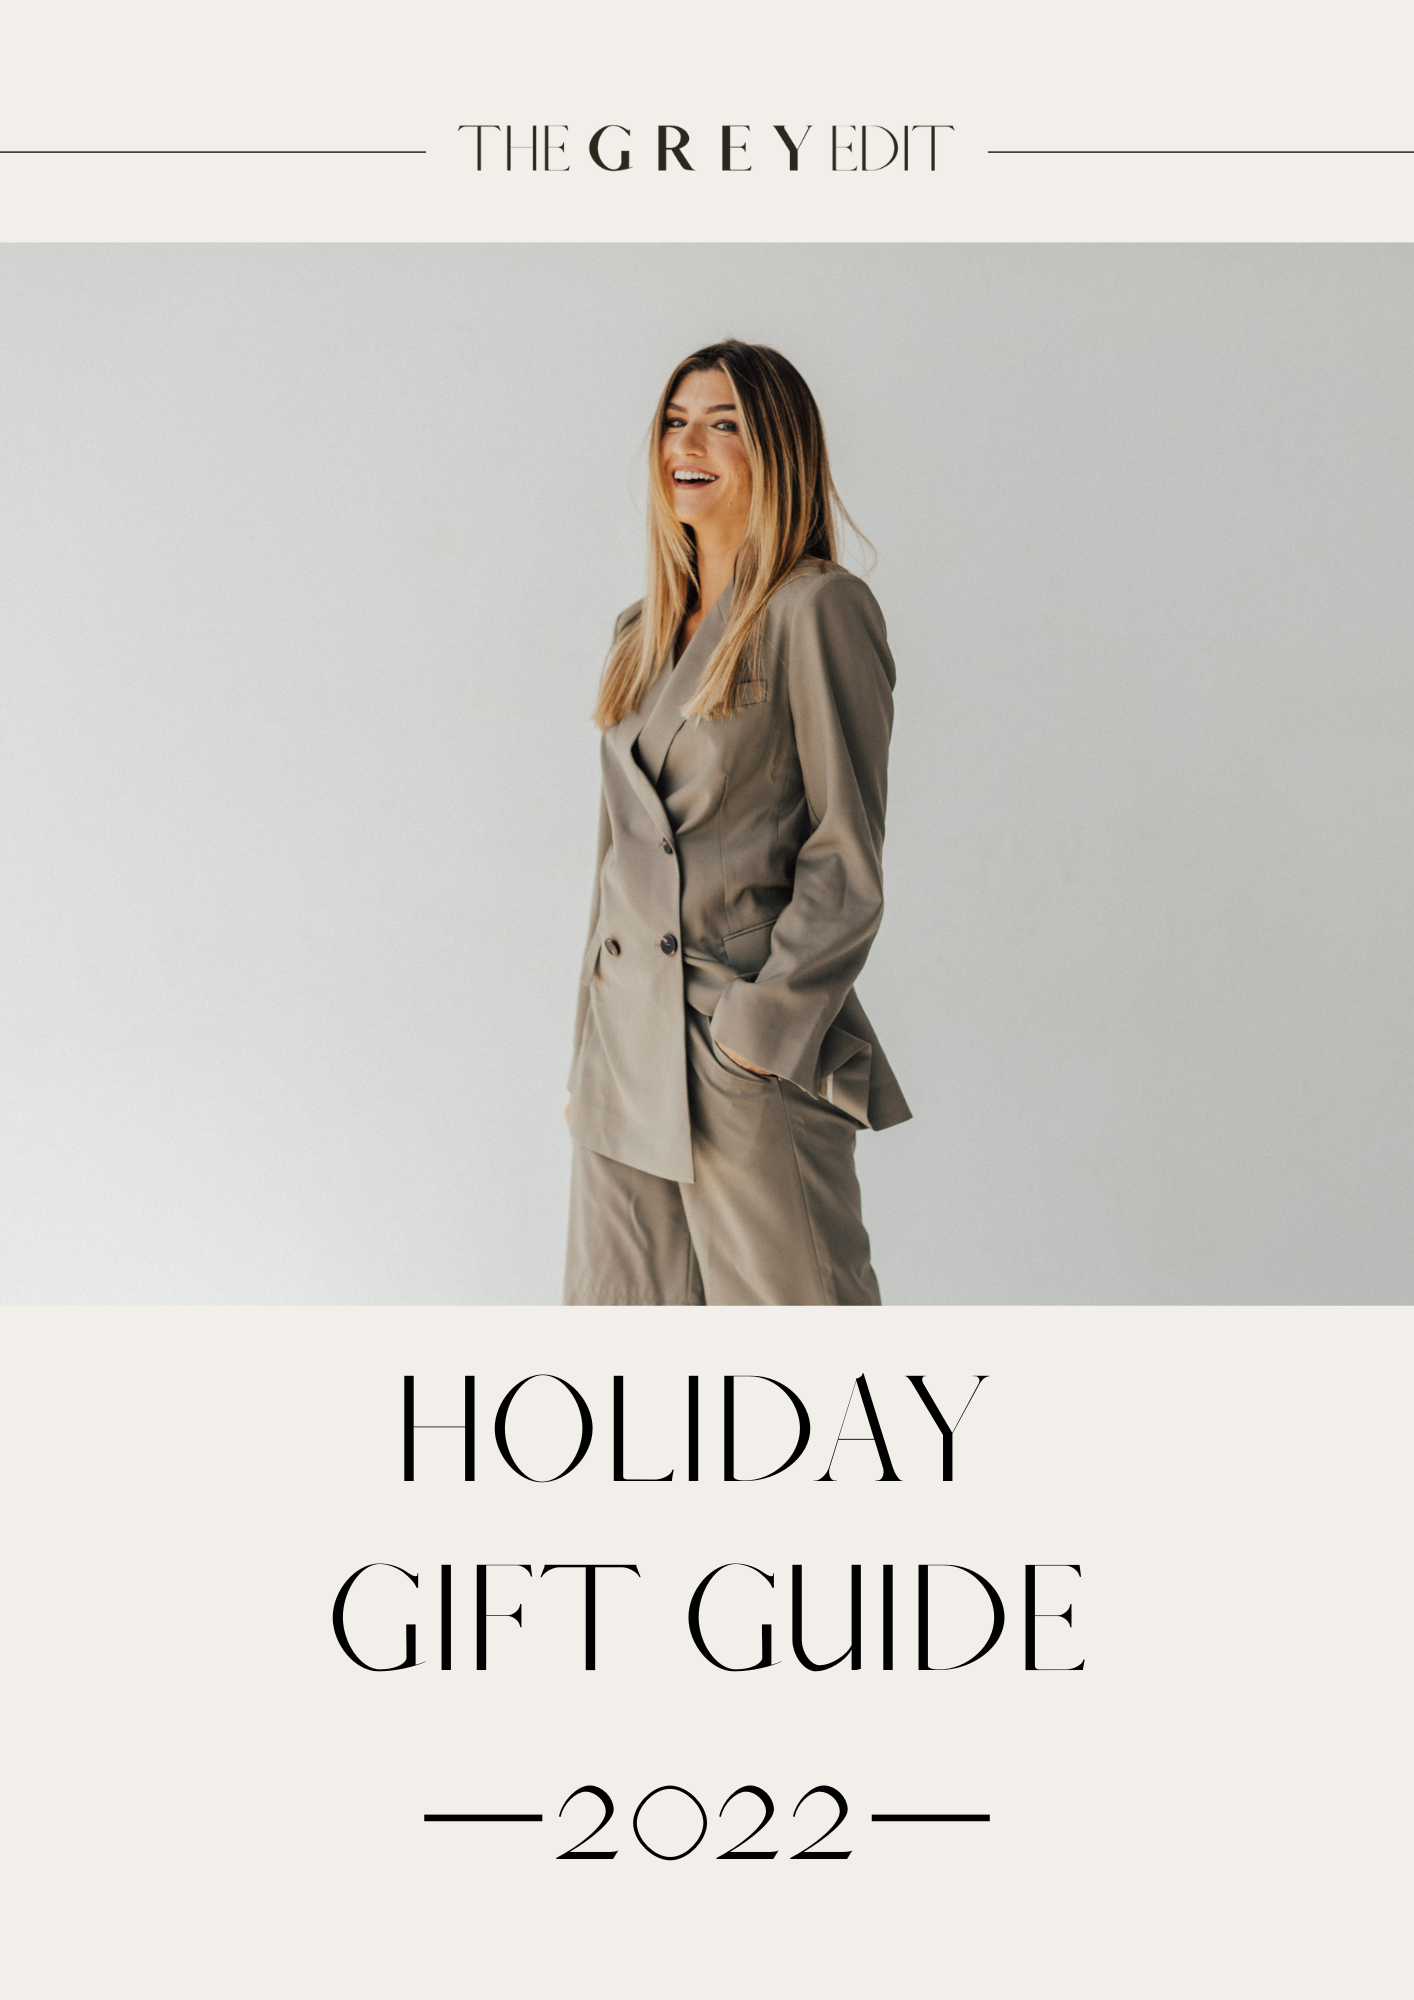 cortney bigelow - the grey edit - 2022 holiday gift guide